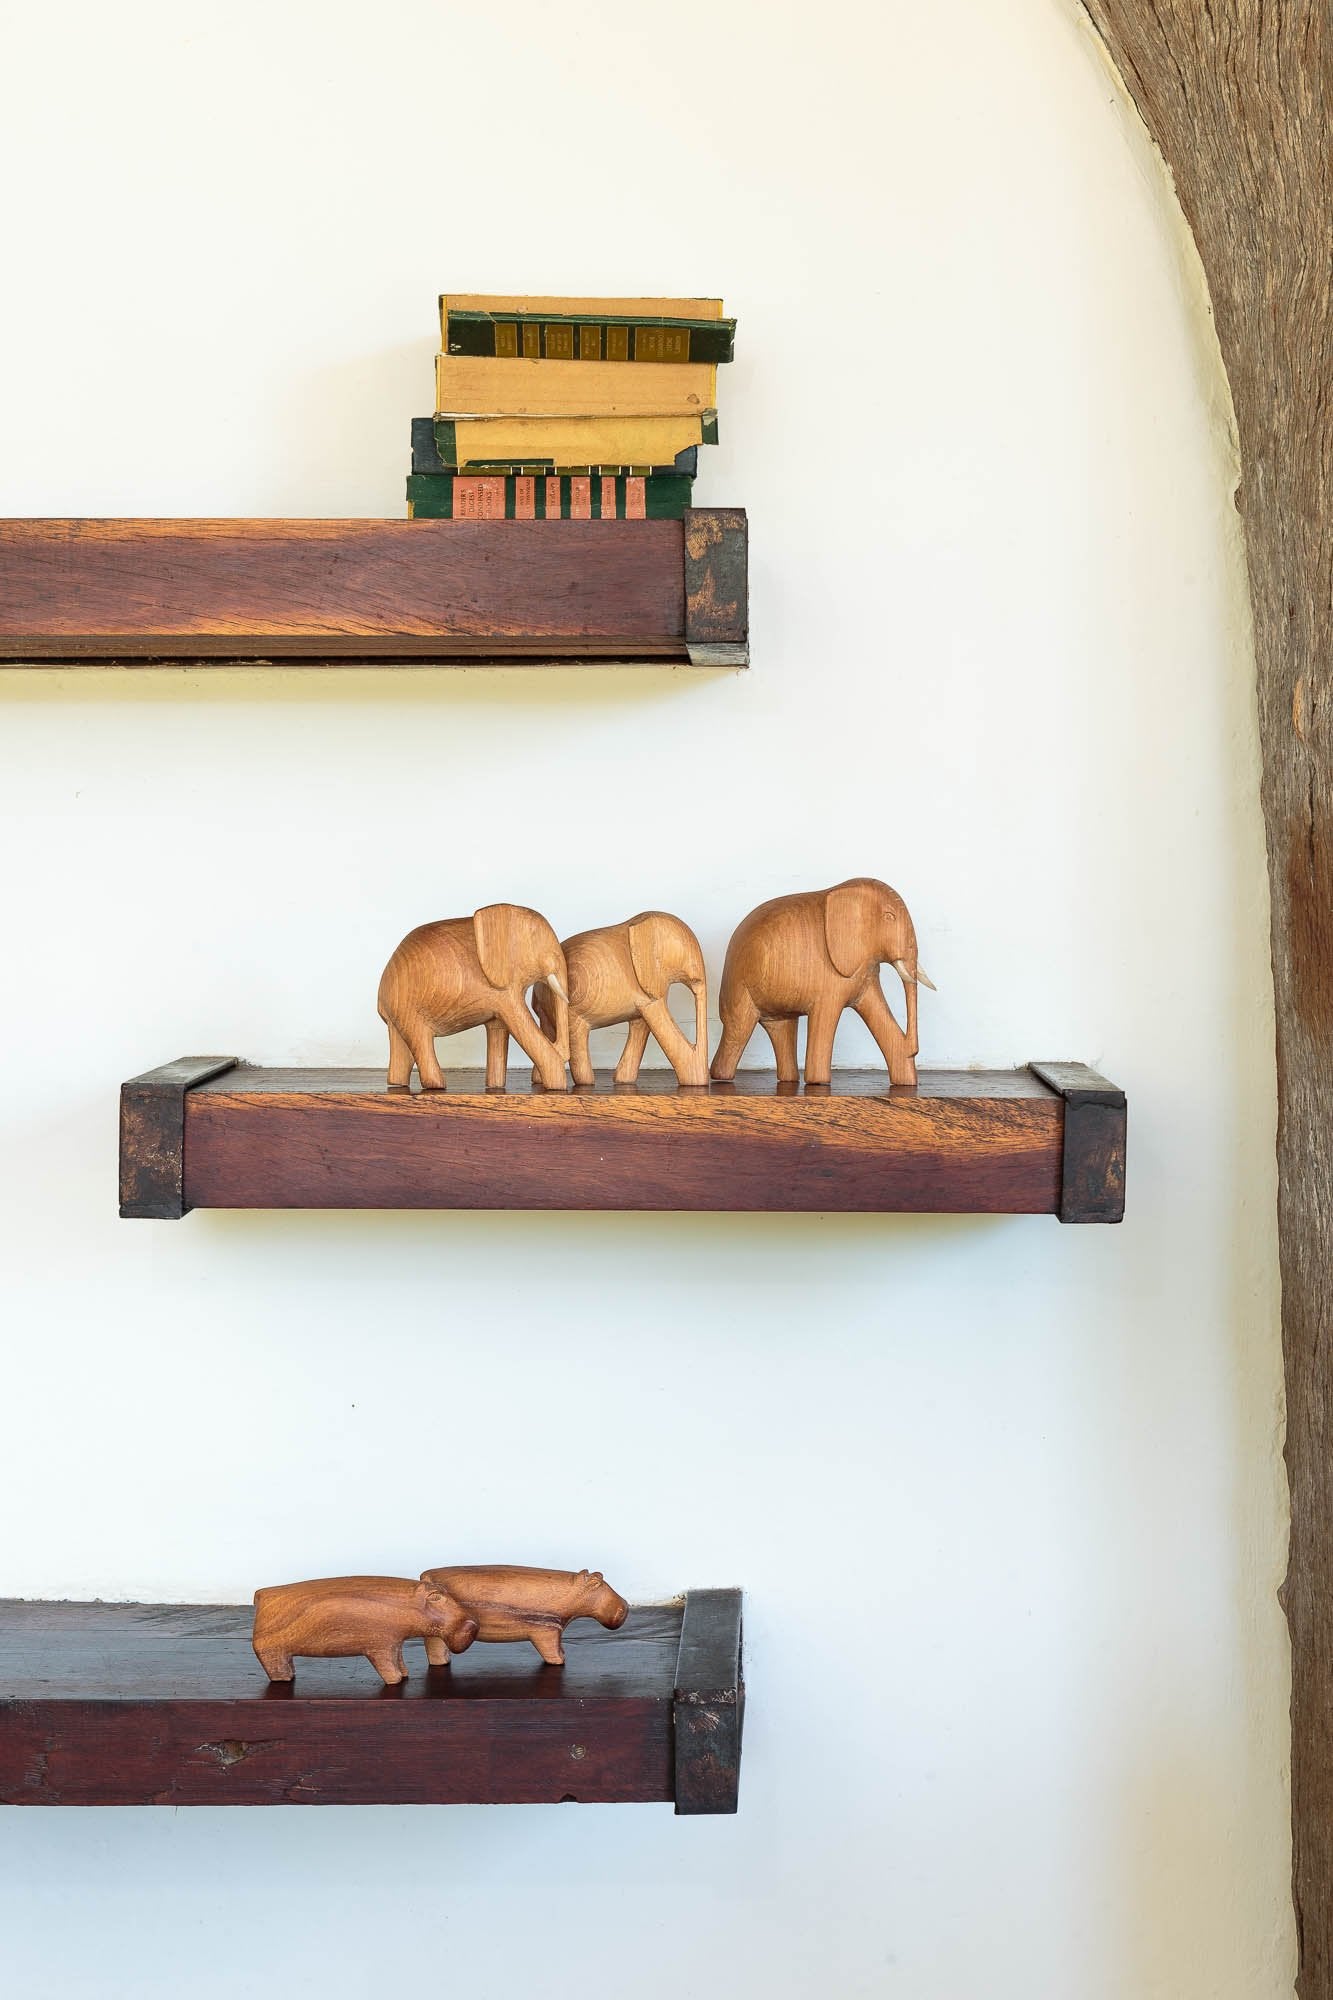 Wood Animal - Elephant - Wood by TRIBAL TEXTILES - Handcrafted Home Decor Interiors - African Made